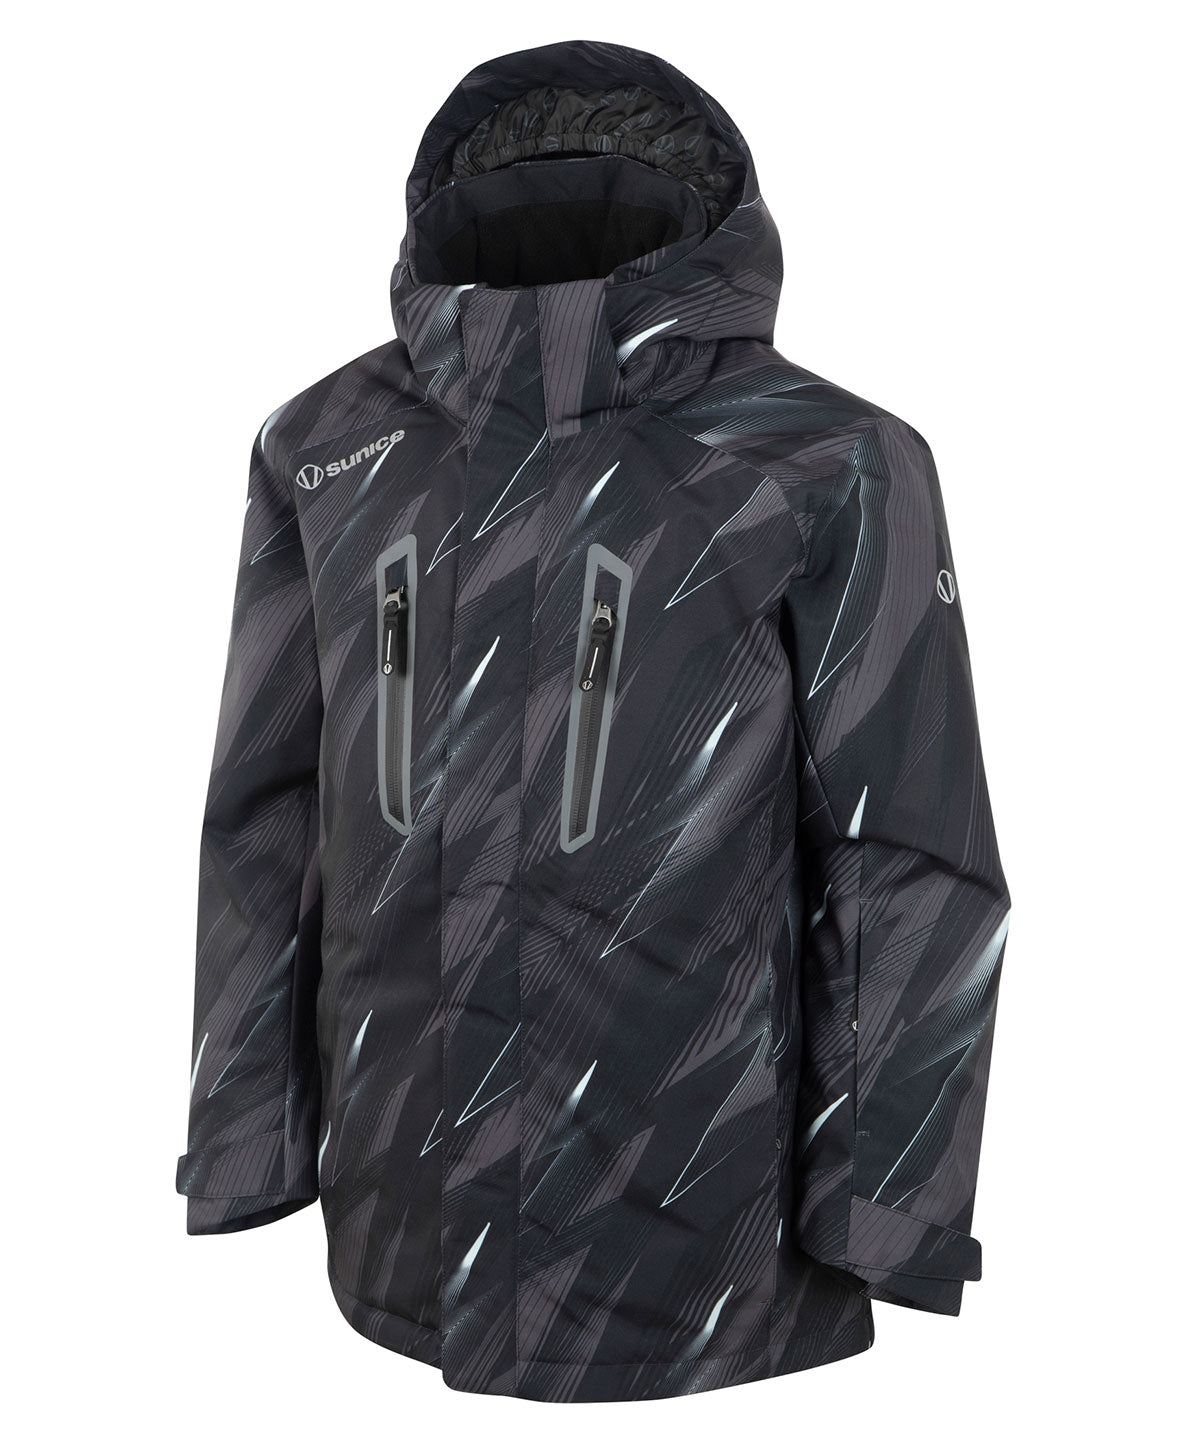 16 Ski Jackets and Pants to Get You Through Your Snow Trip